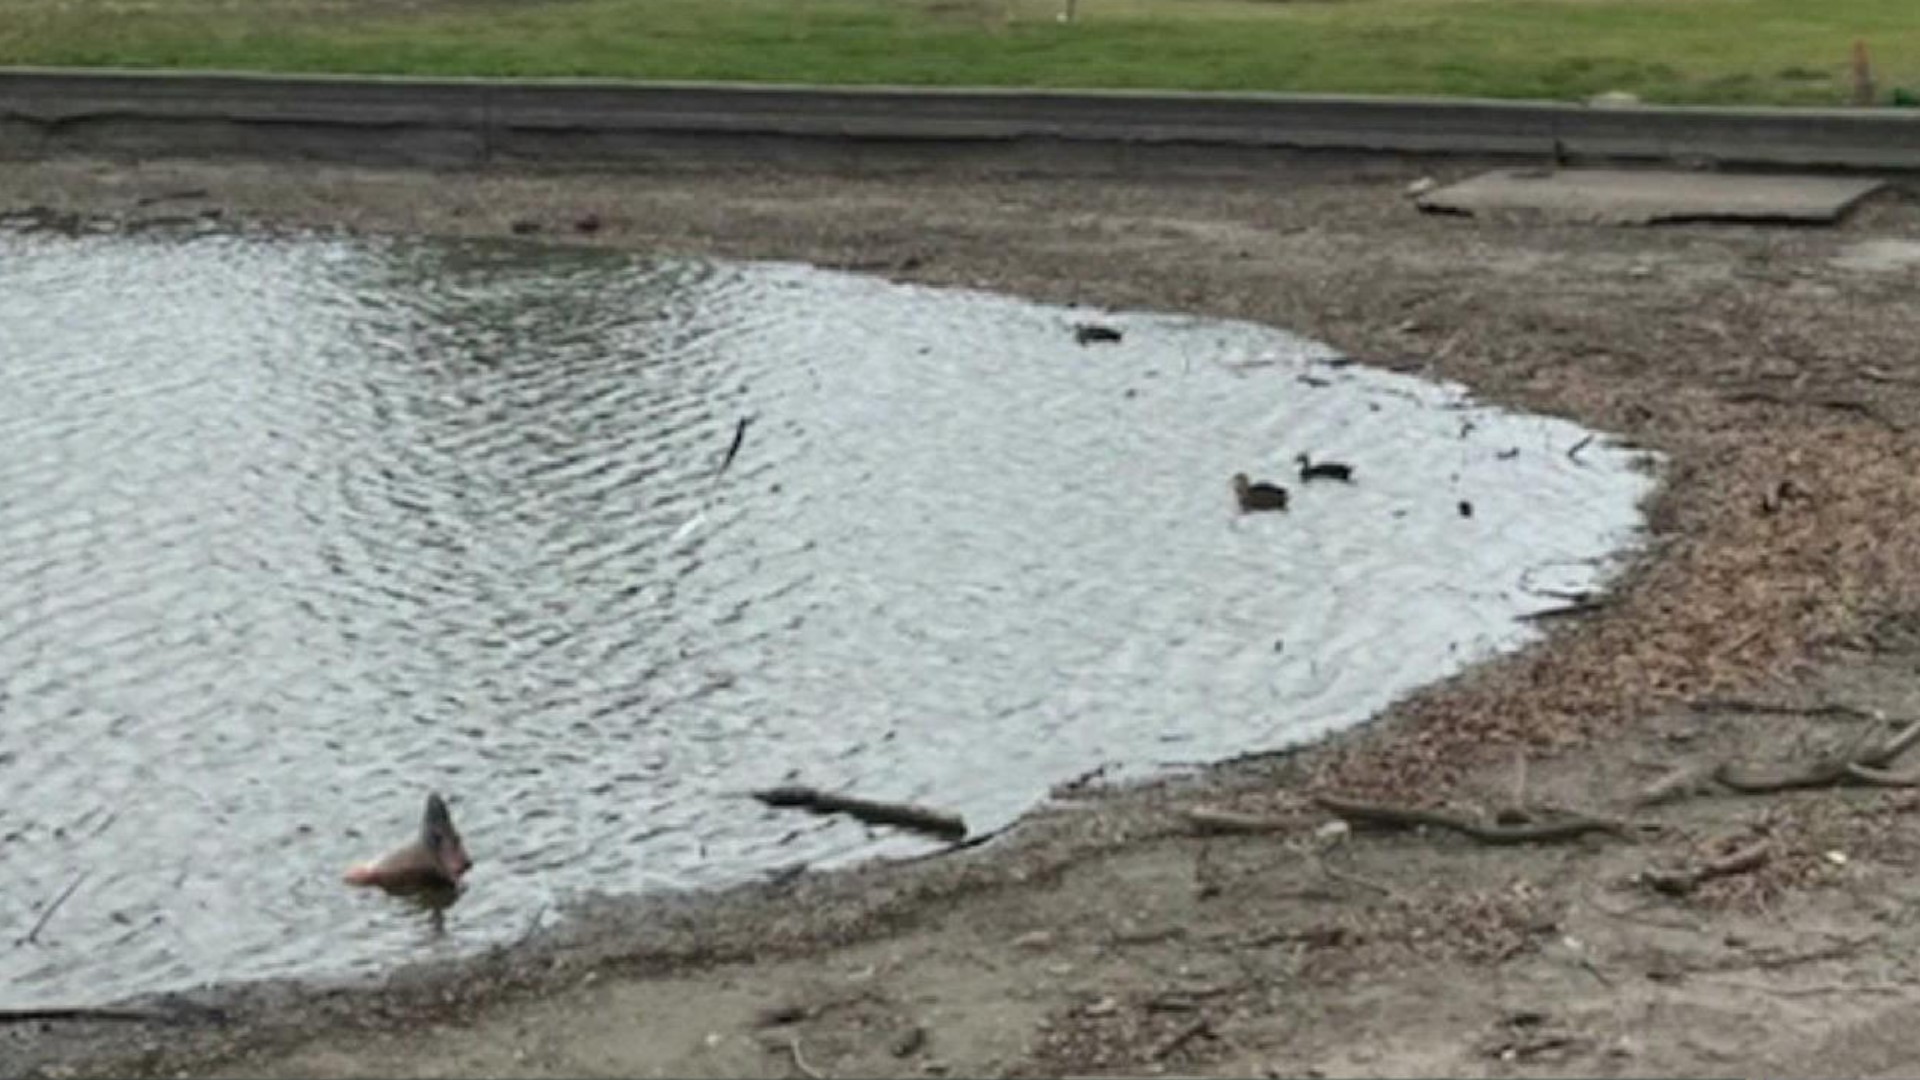 April Guzman and her family came out to feed the animals at the duck pond, and were shocked to see how little water was left for the birds and turtles.